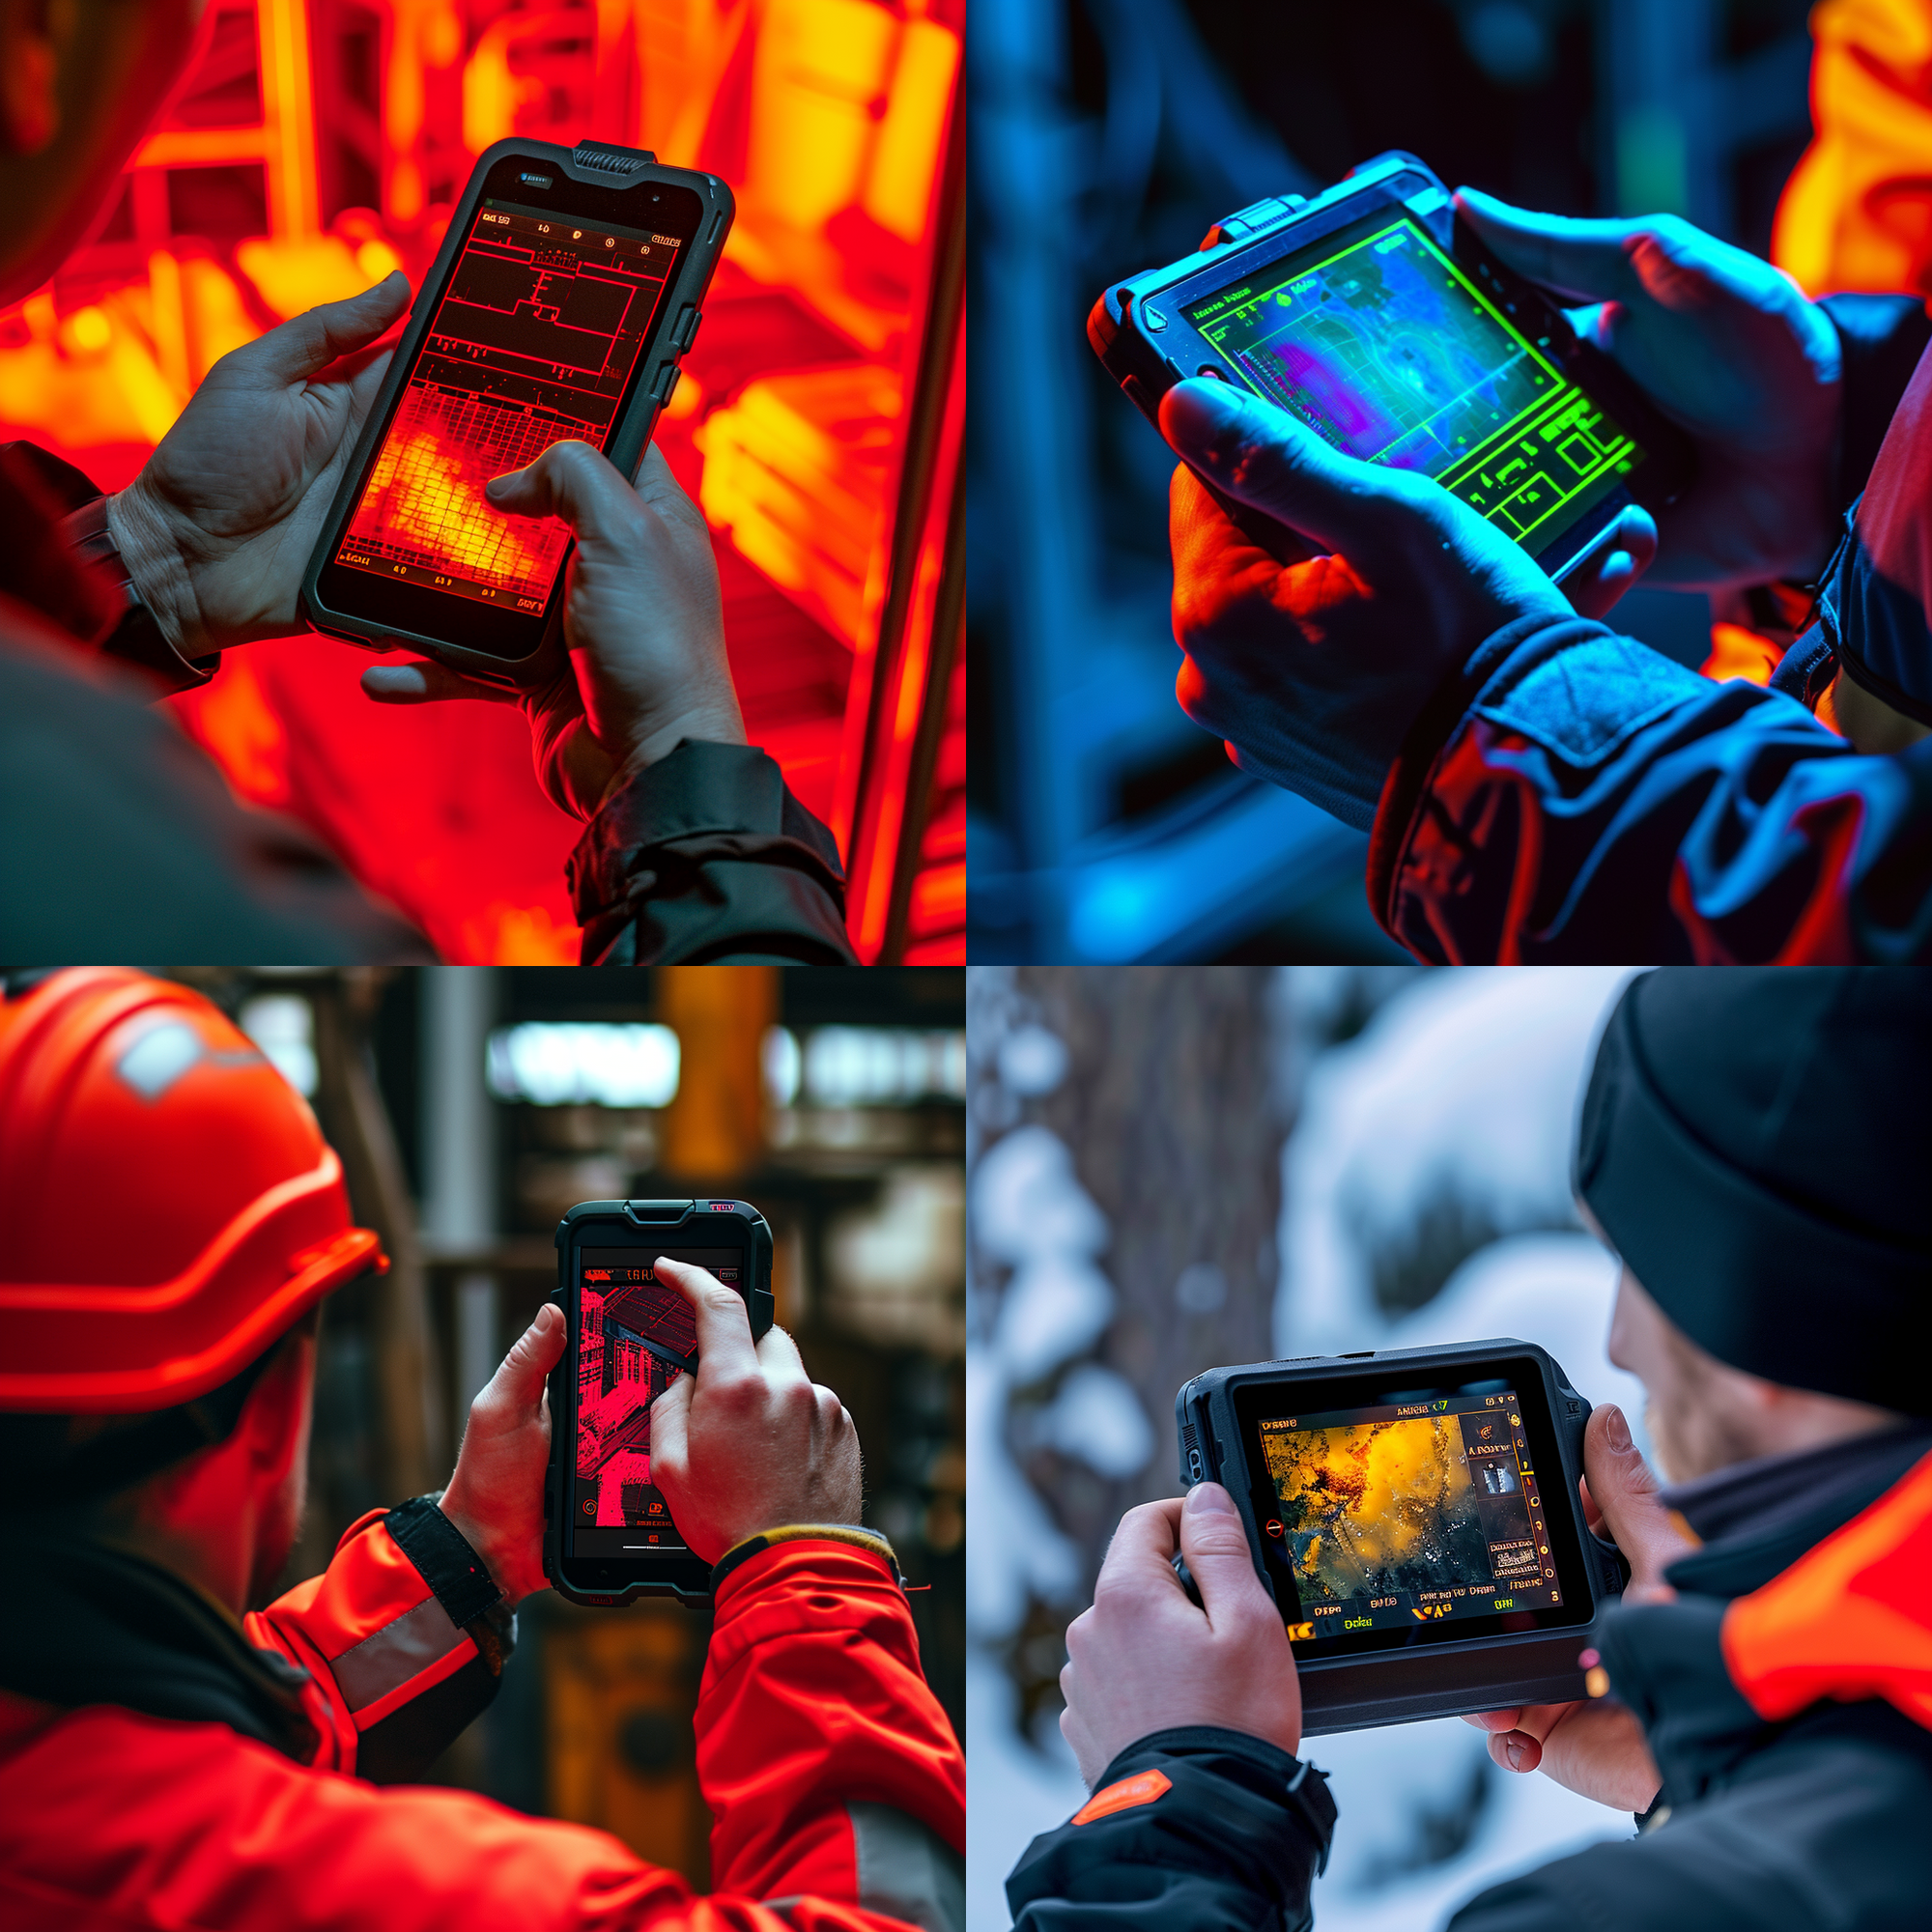 Thermal Imaging in Rugged Devices: Revolutionizing Vision and Perception